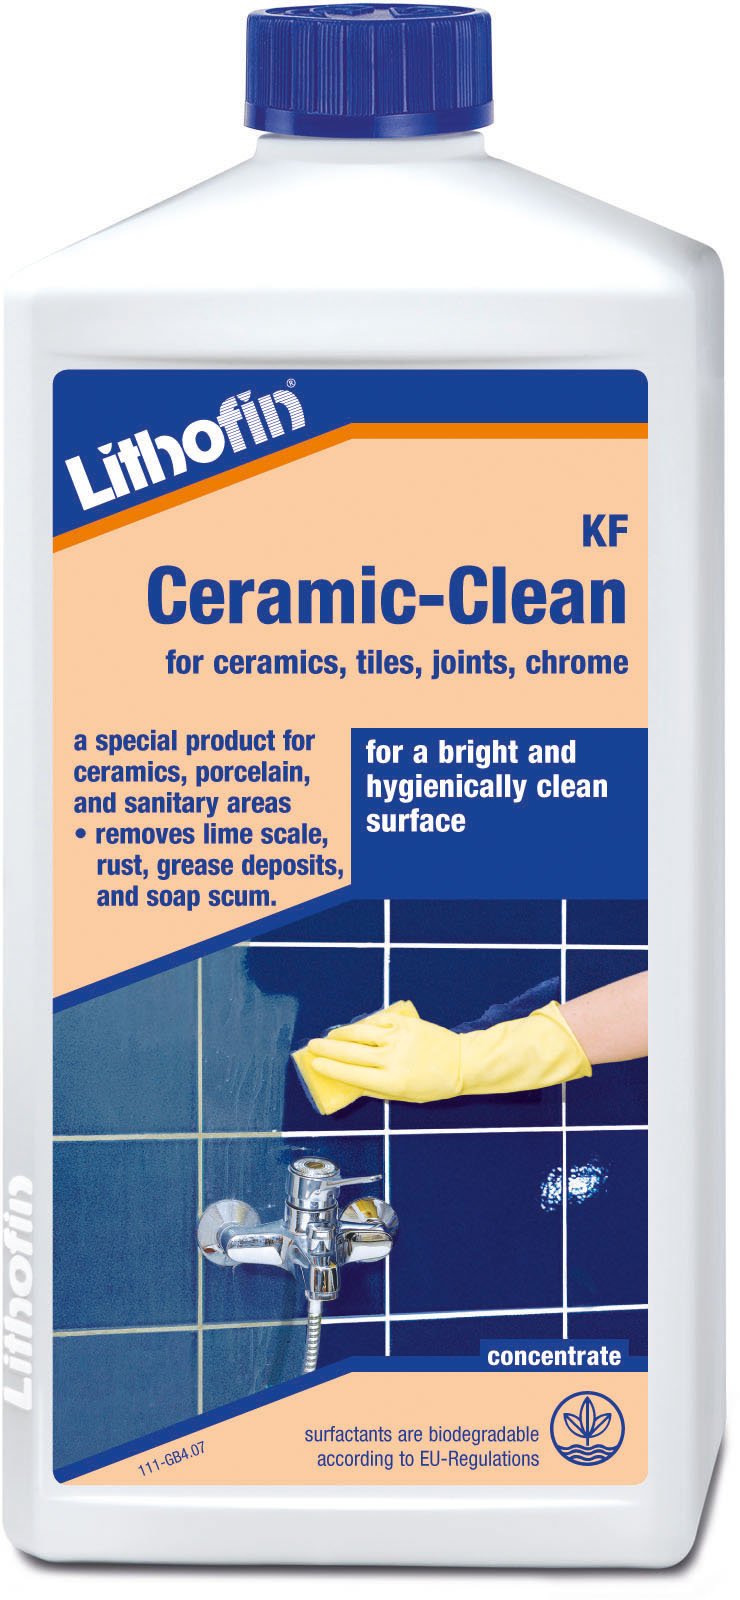 Lithofin ceramic-clean - for bright and hygienically clean surface 